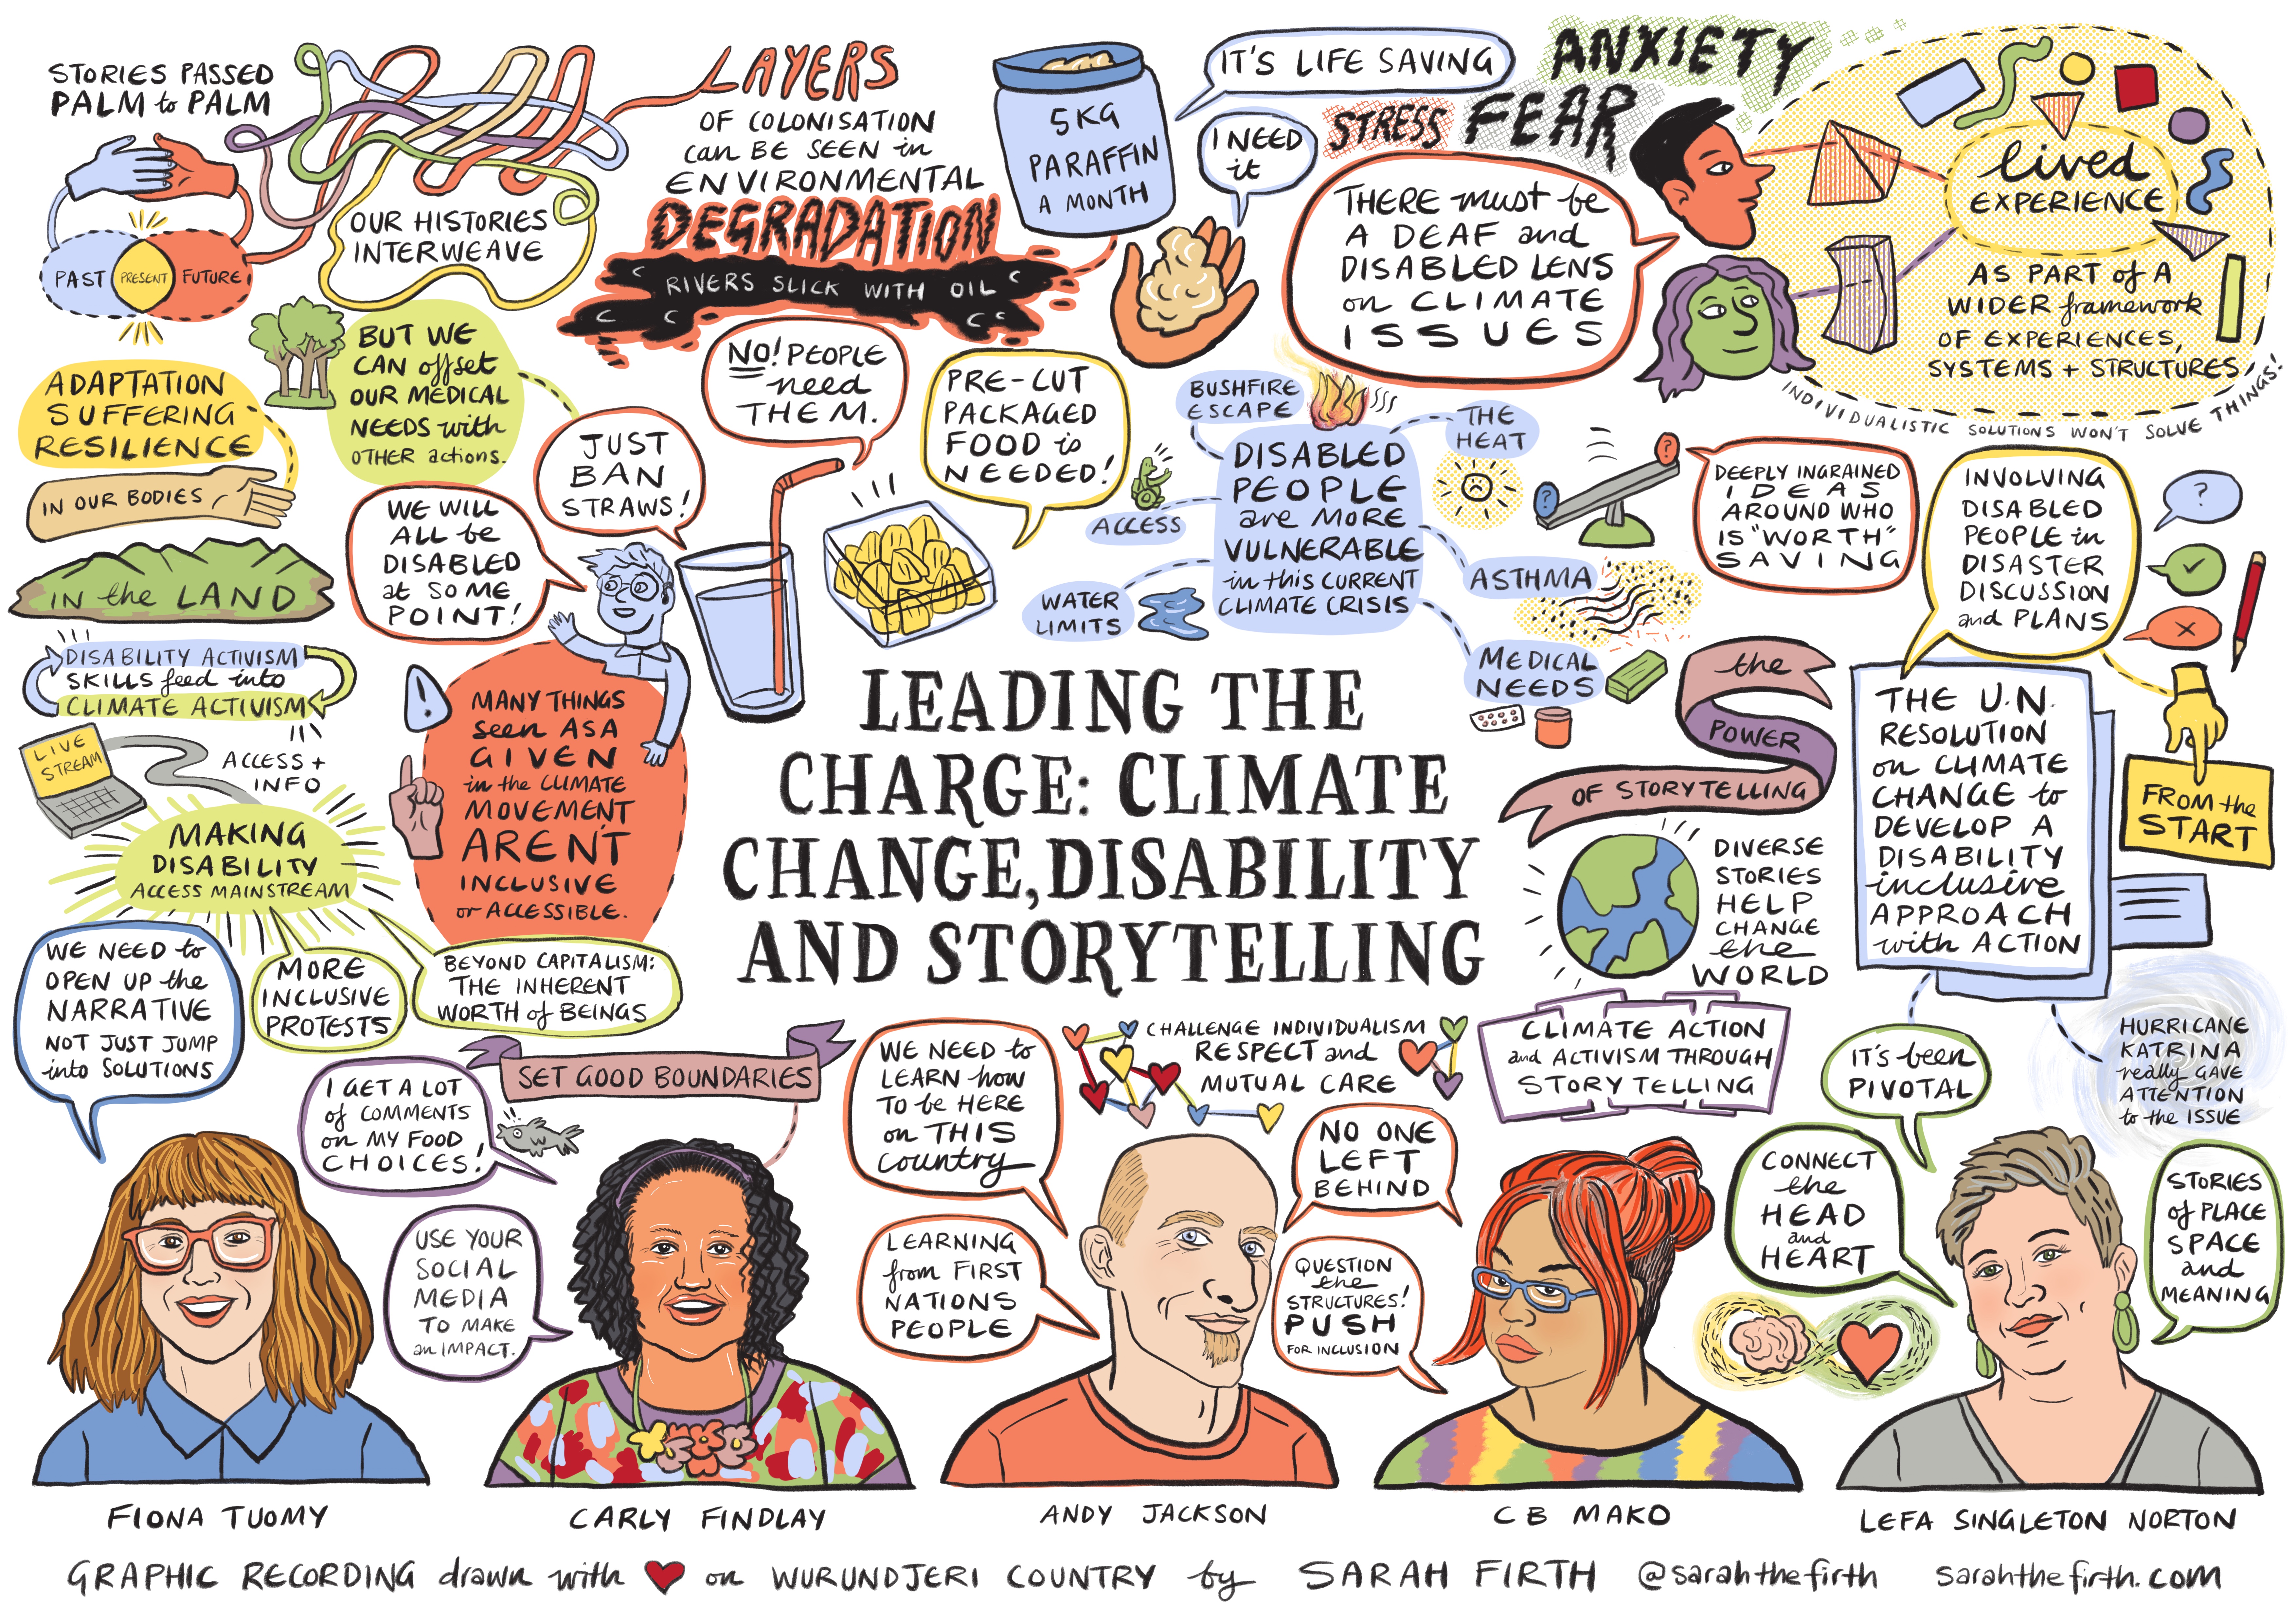 A graphic recording capturing the main points and ideas of the 2019 panel discussion 'Leading the Charge: Climate Change, Disability and Storytelling', including illustrations of the speakers Fiona Tuomy, Carly Findlay, Andy Jackson, CB Mako and Lefa Singleton Norton.